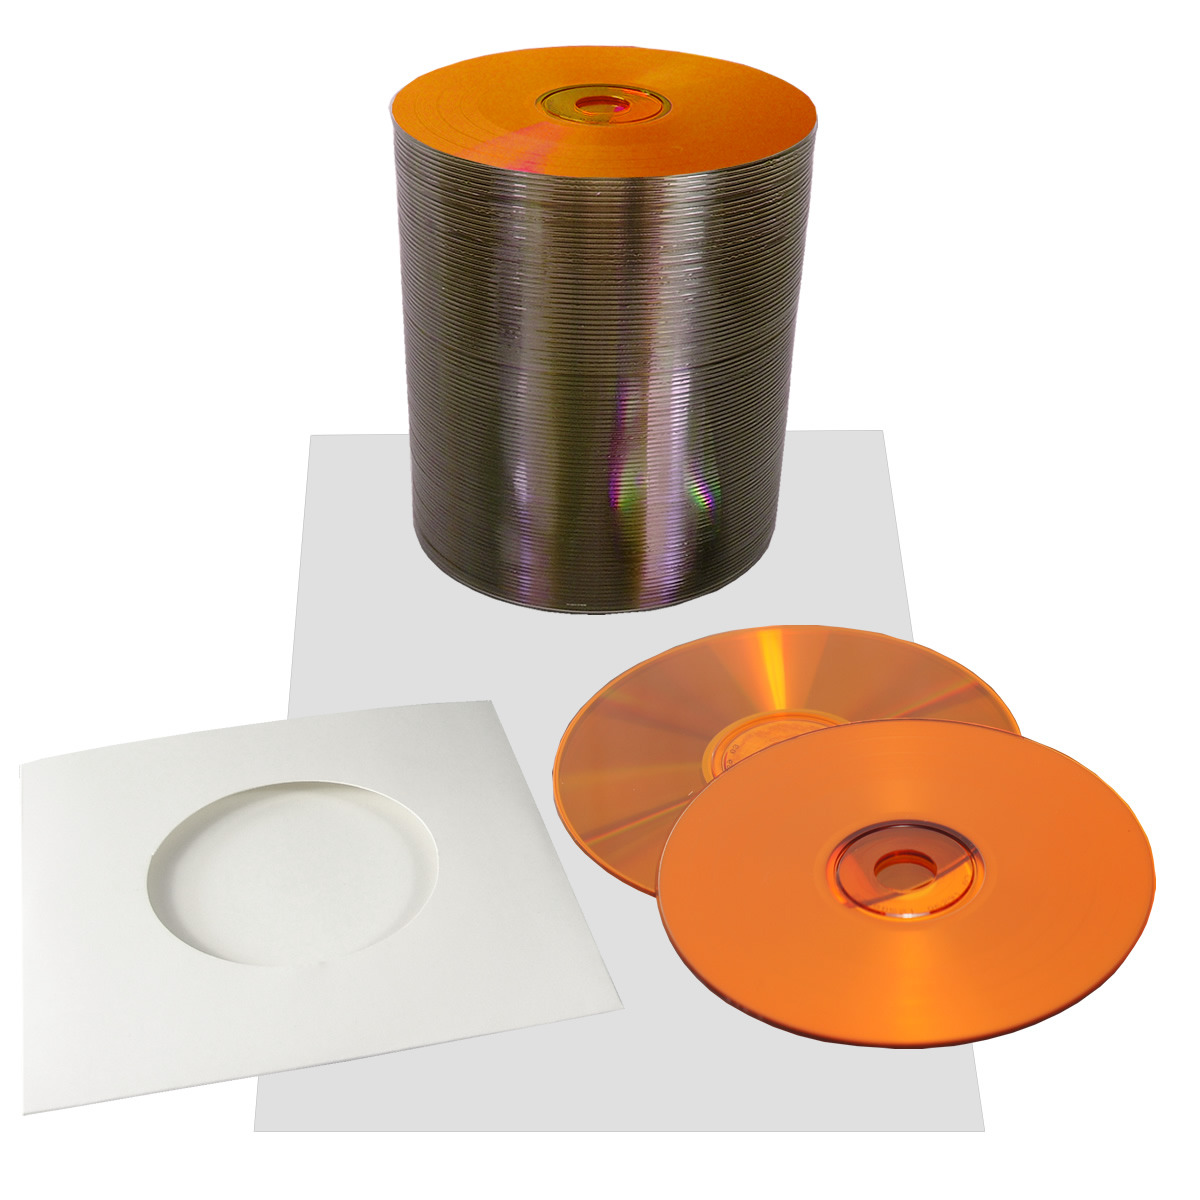 Blank 12cm orange vinyl CD  R  700MB with stickers  and 